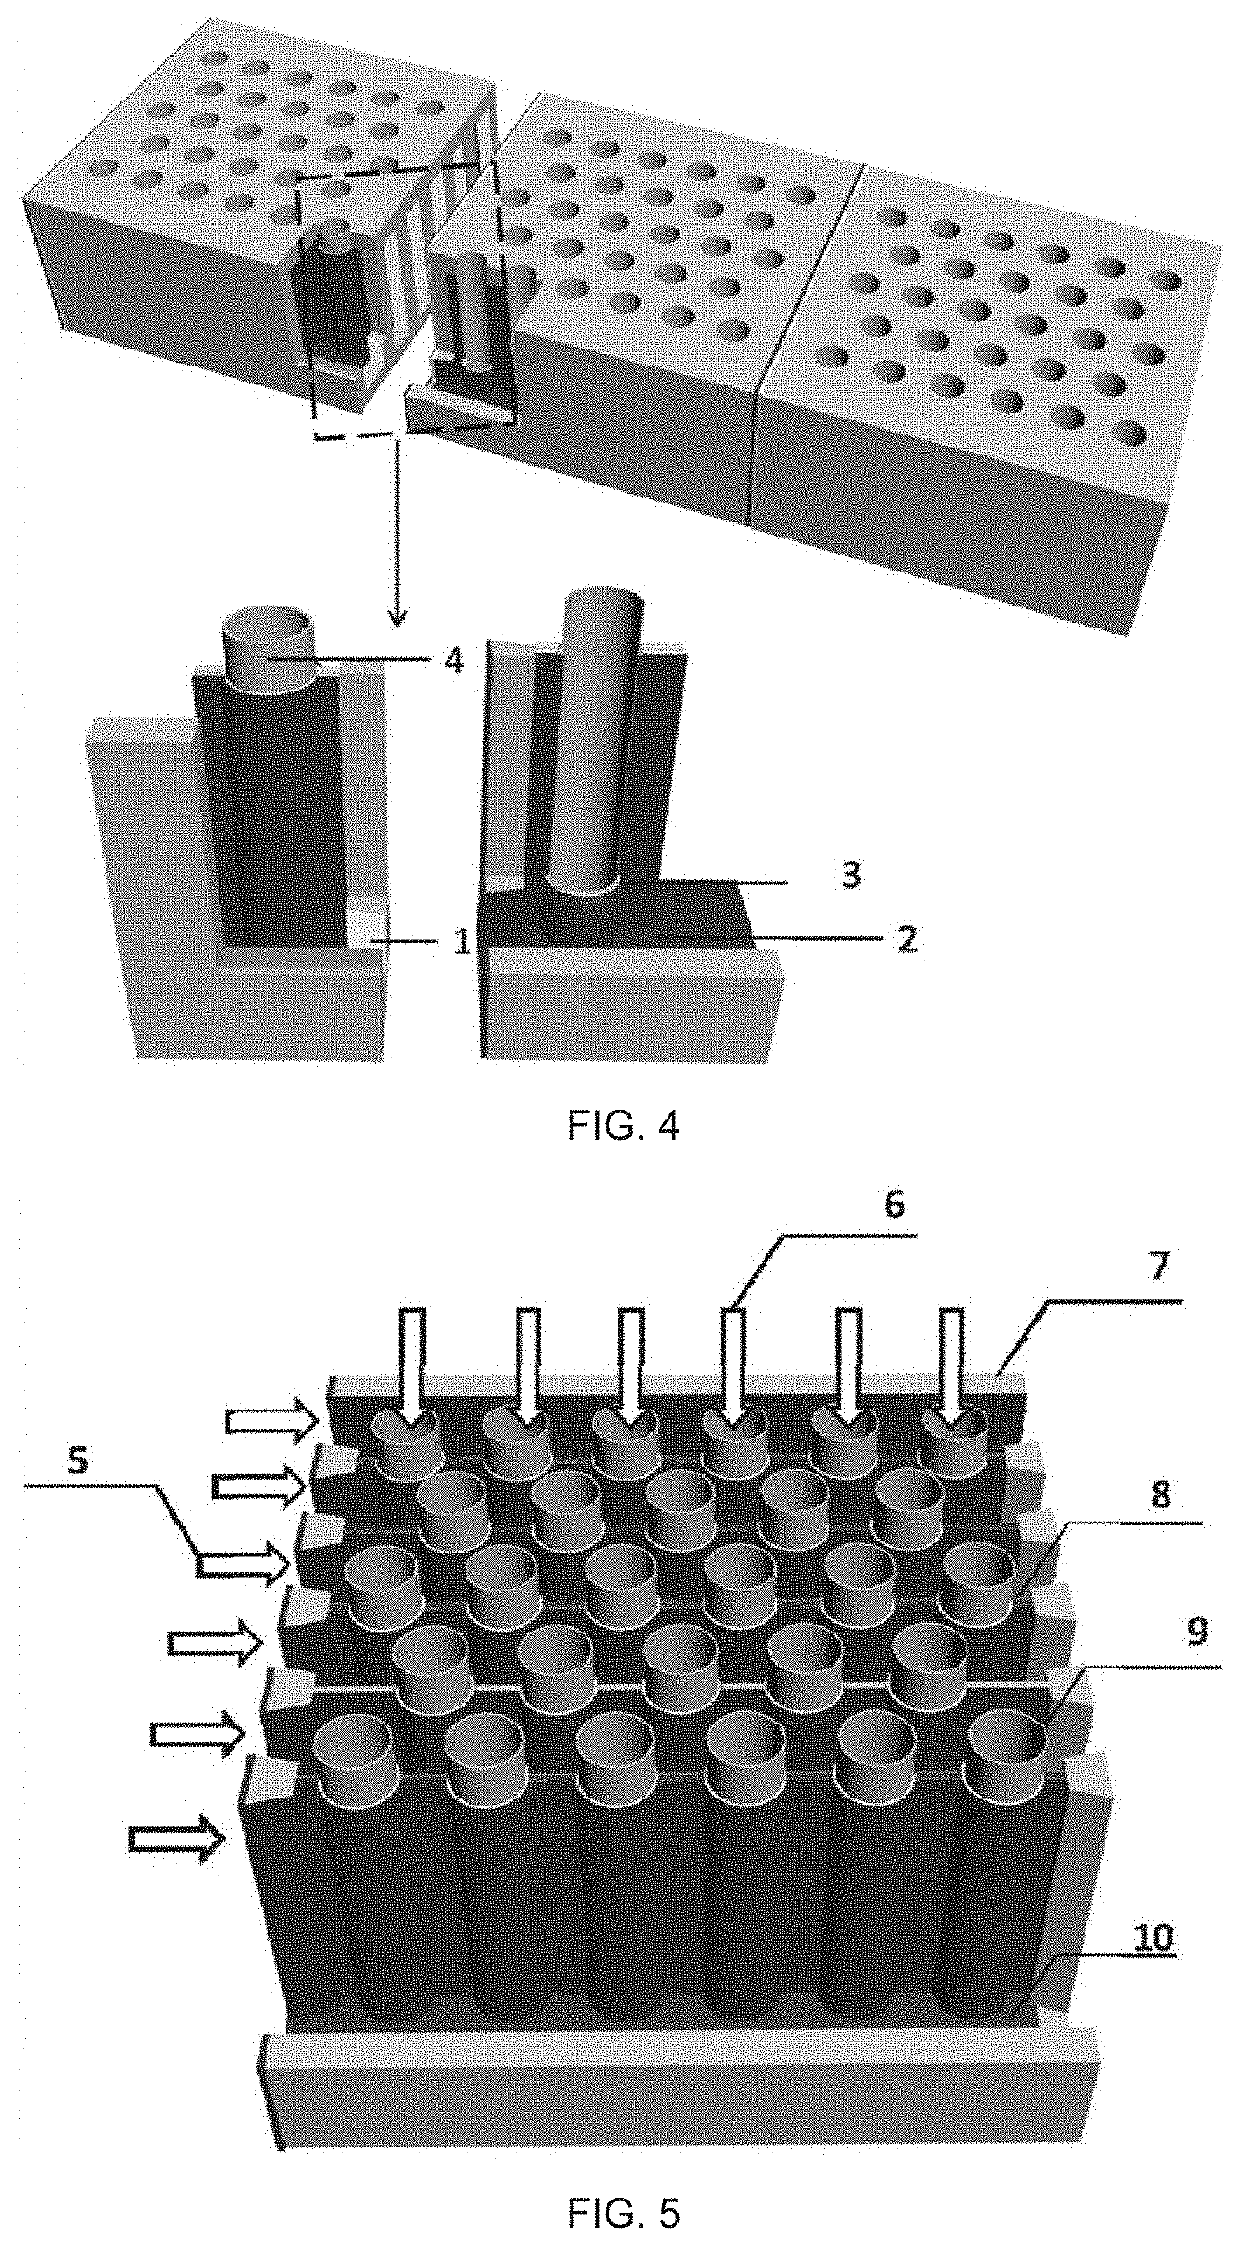 Method for Preparing Connector-free Anode-supported Solid Oxide Fuel Cell Stack by Means of 3D Printing